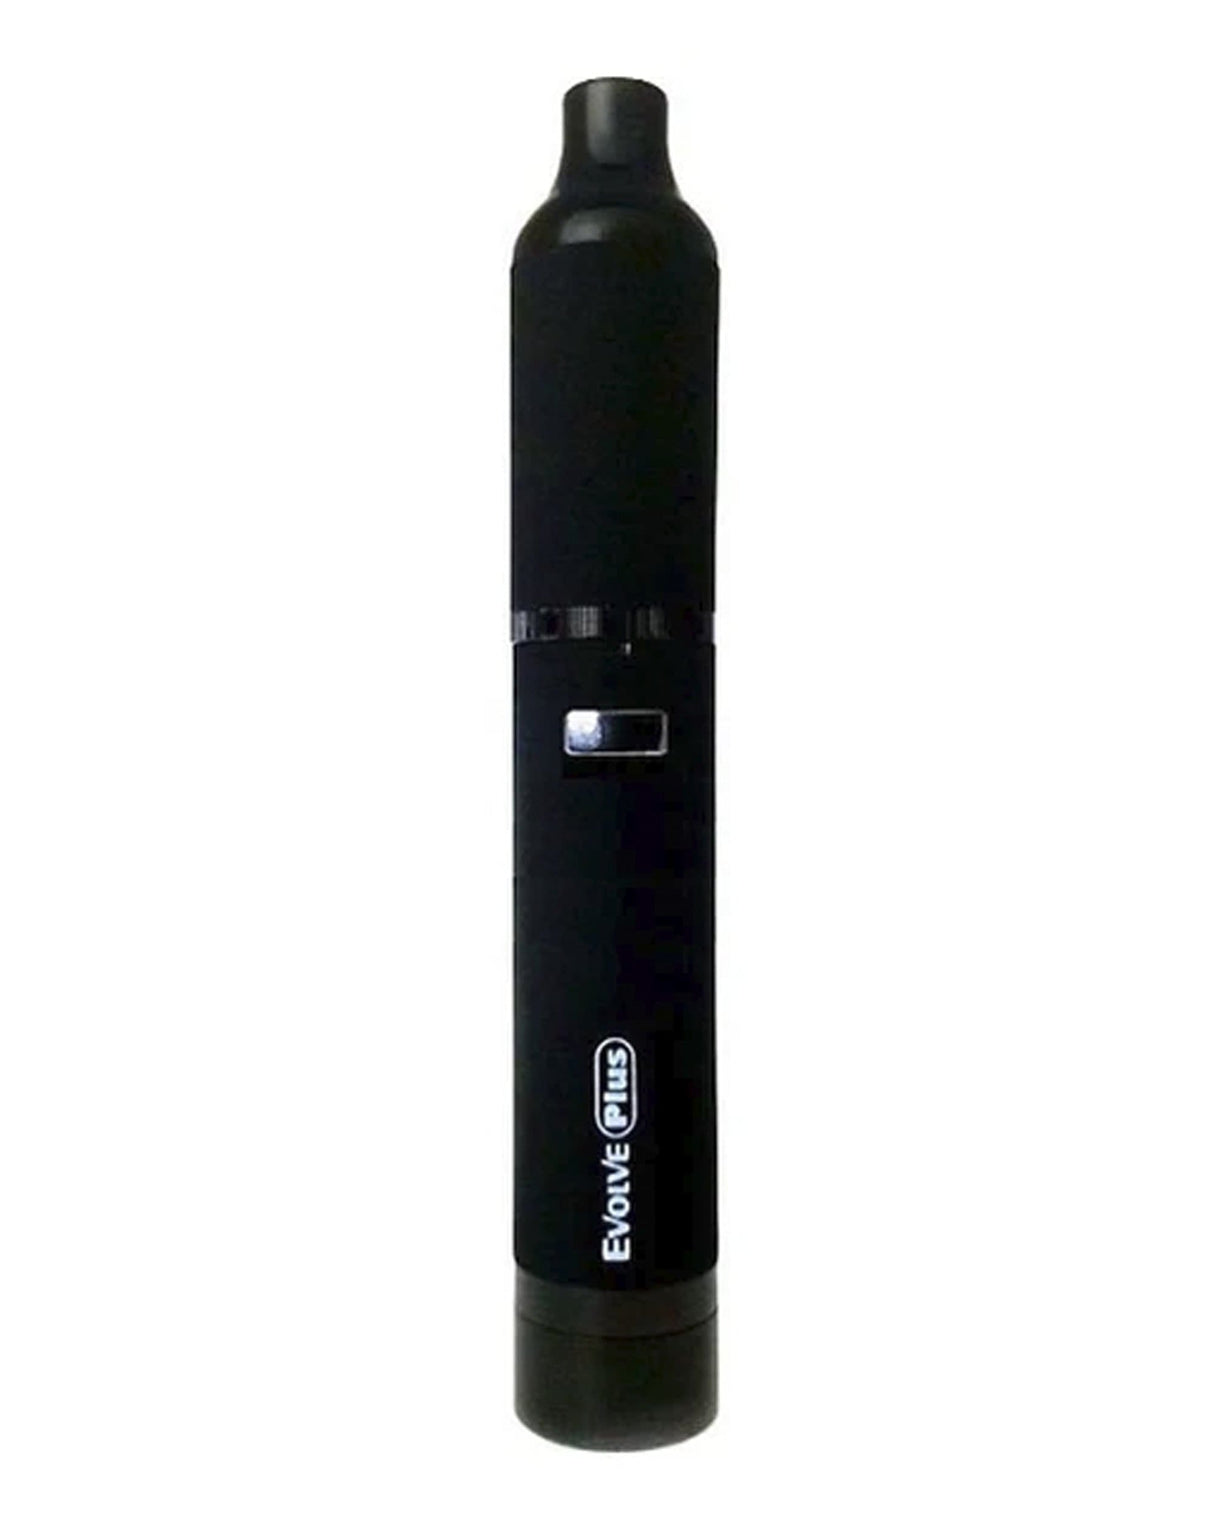 Yocan Evolve Plus Vaporizer in Midnight Black, front view, 1100mAh battery, quartz dual coil for concentrates